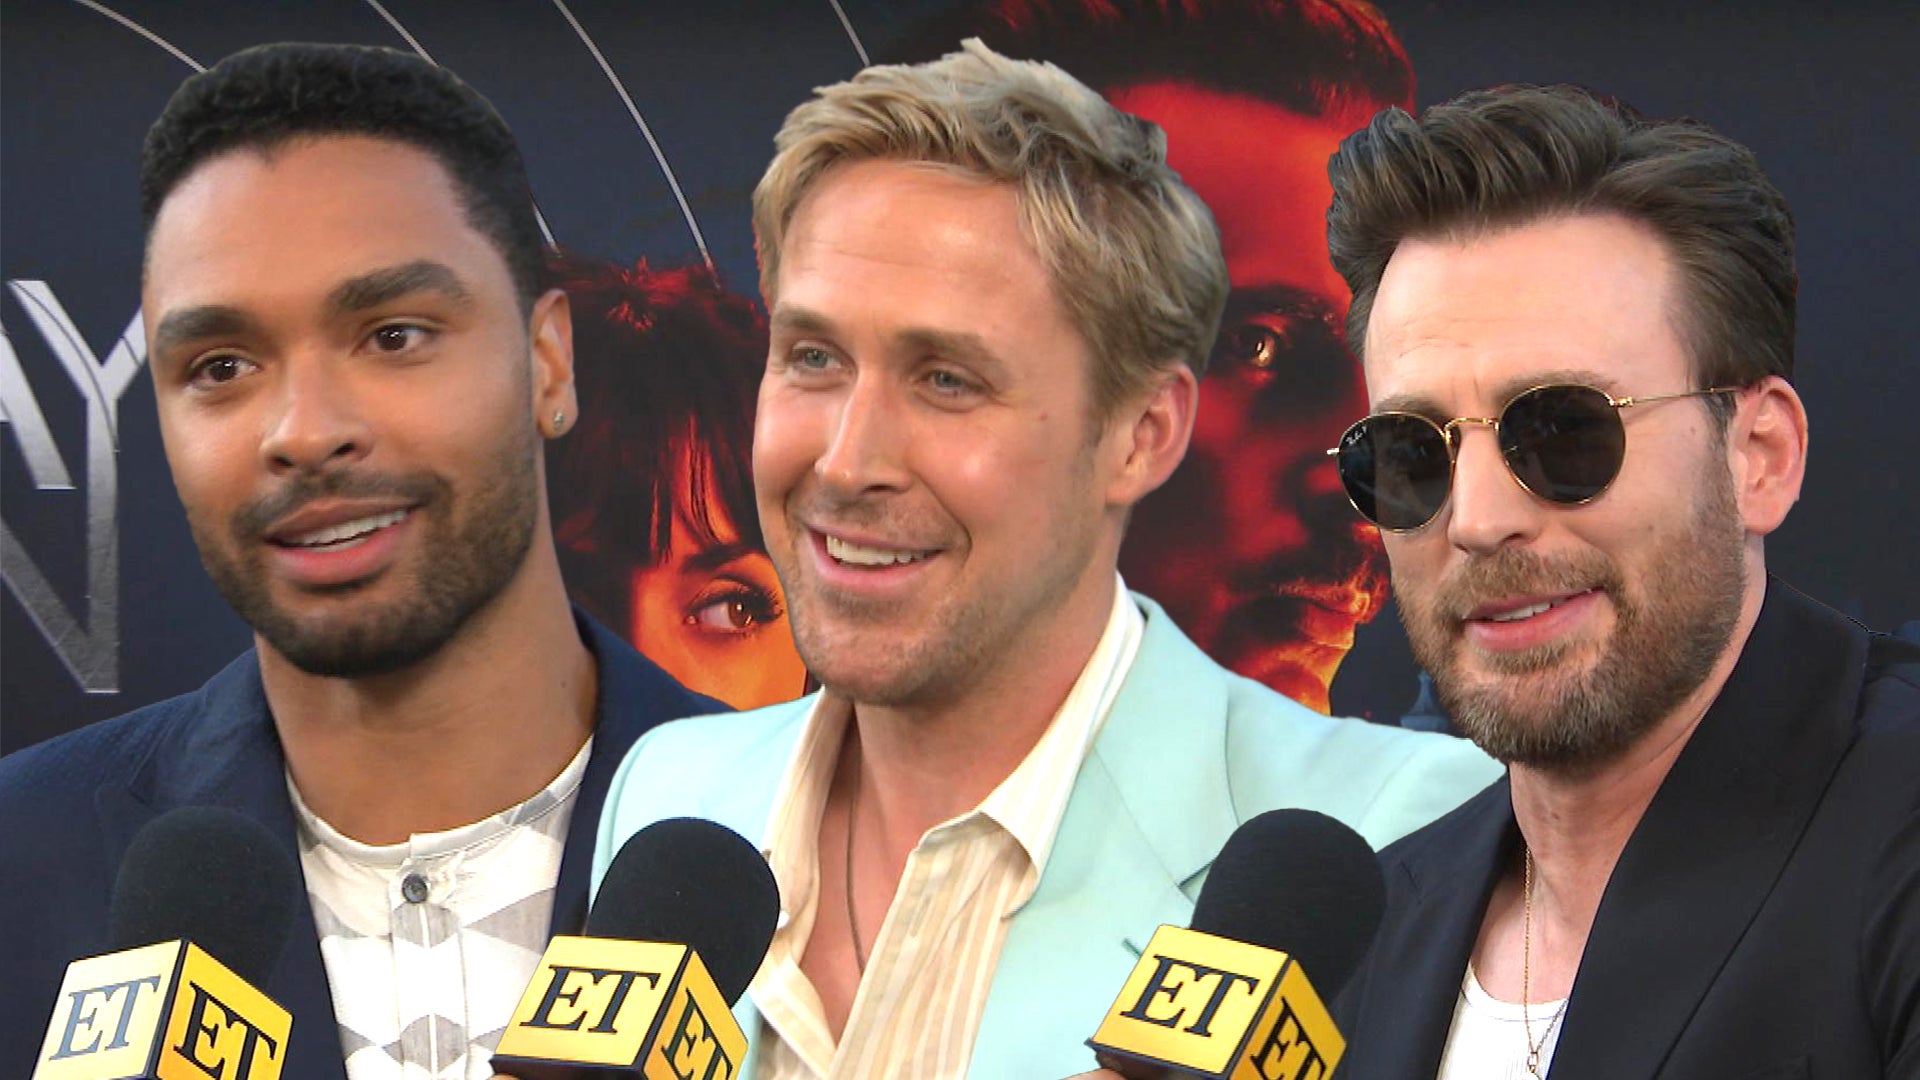 The Gray Man cast, Chris Evans, Ryan Gosling and more